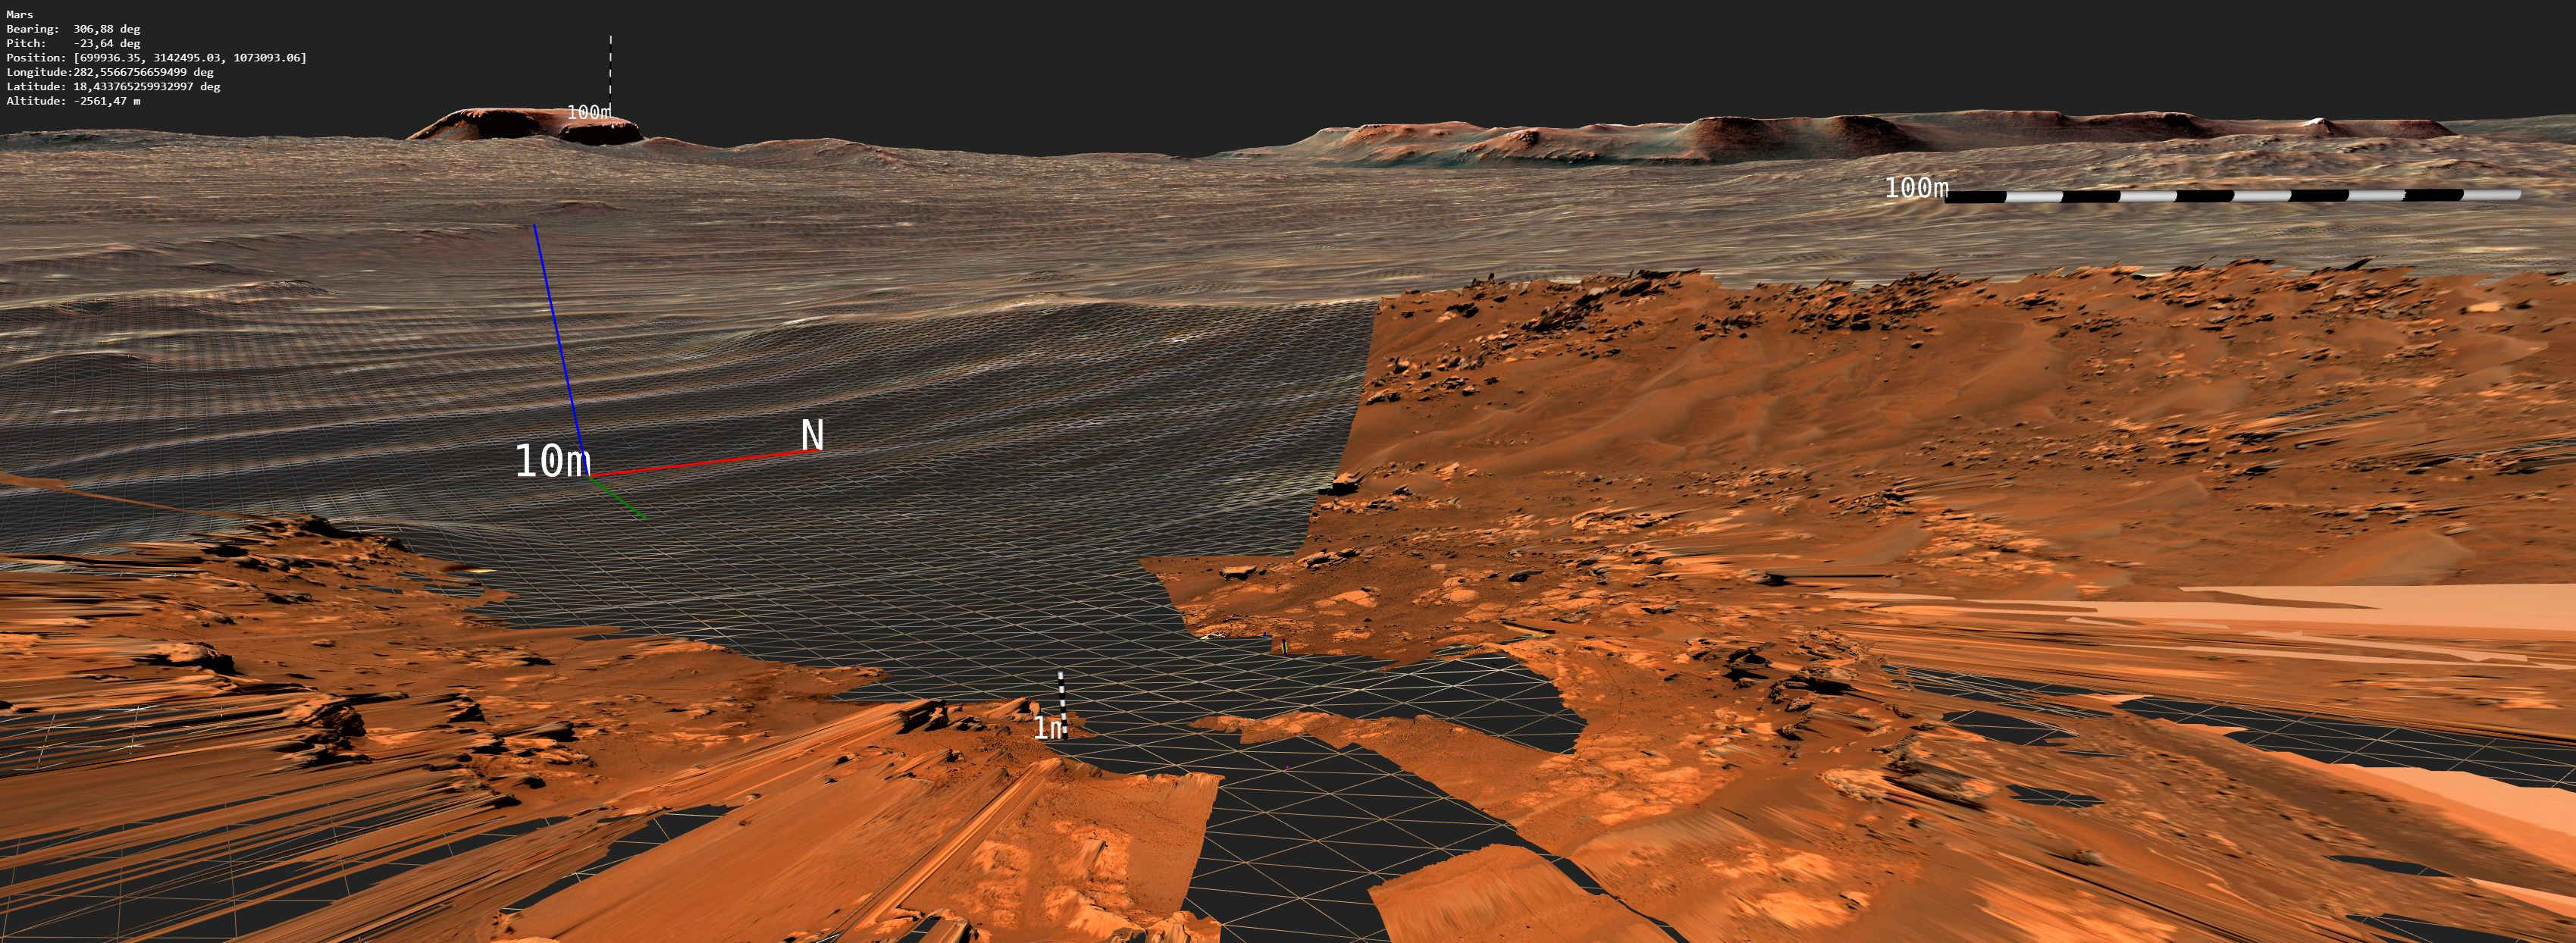 3D reconstruction of the Martian surface with different scale and line drawings.